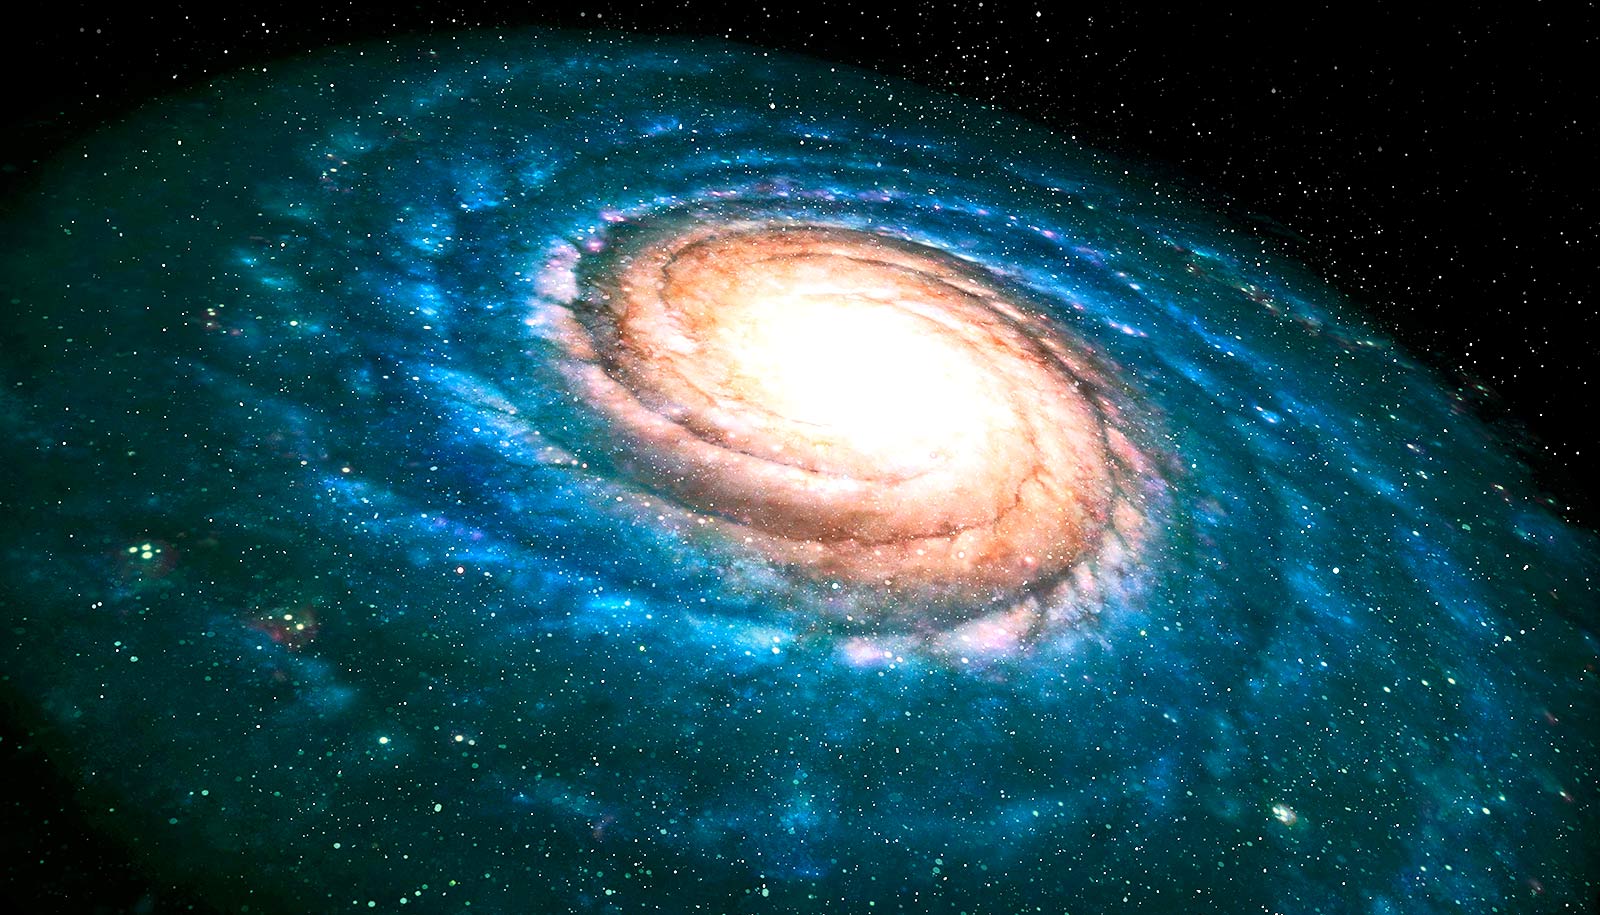 Galaxy formation: The new Milky Way